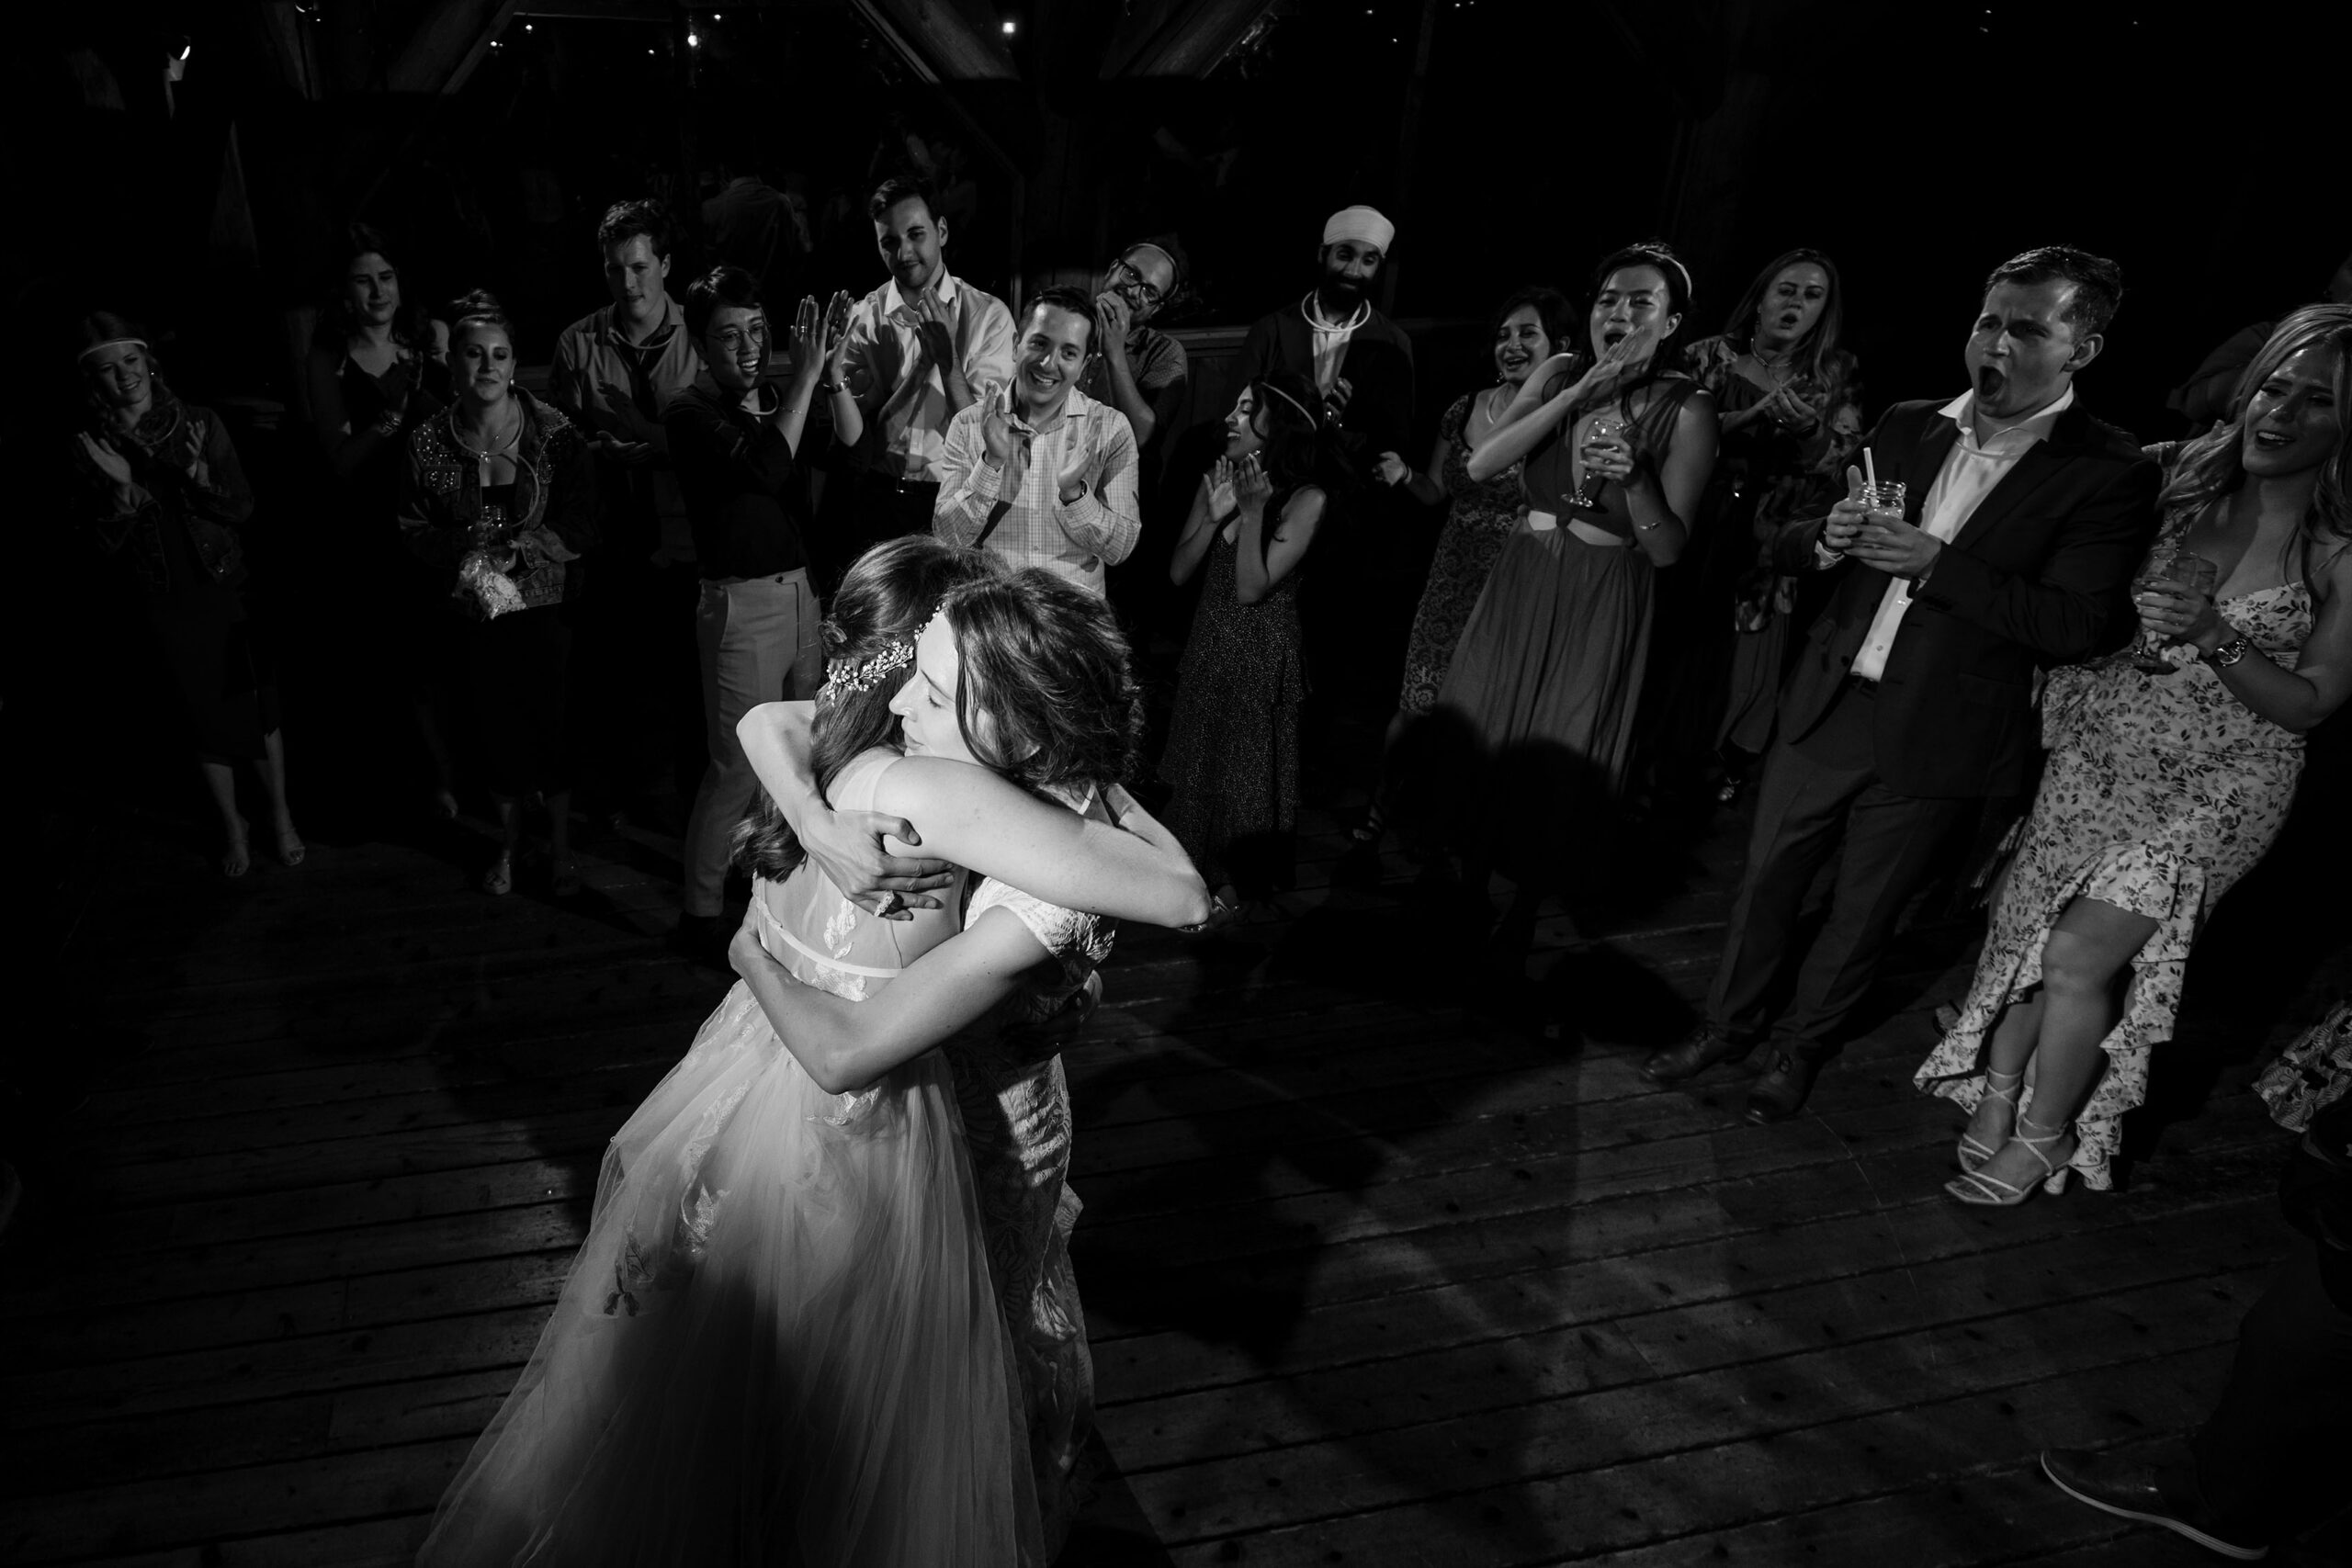 Guests clap as the two brides hug at the end of their rreception